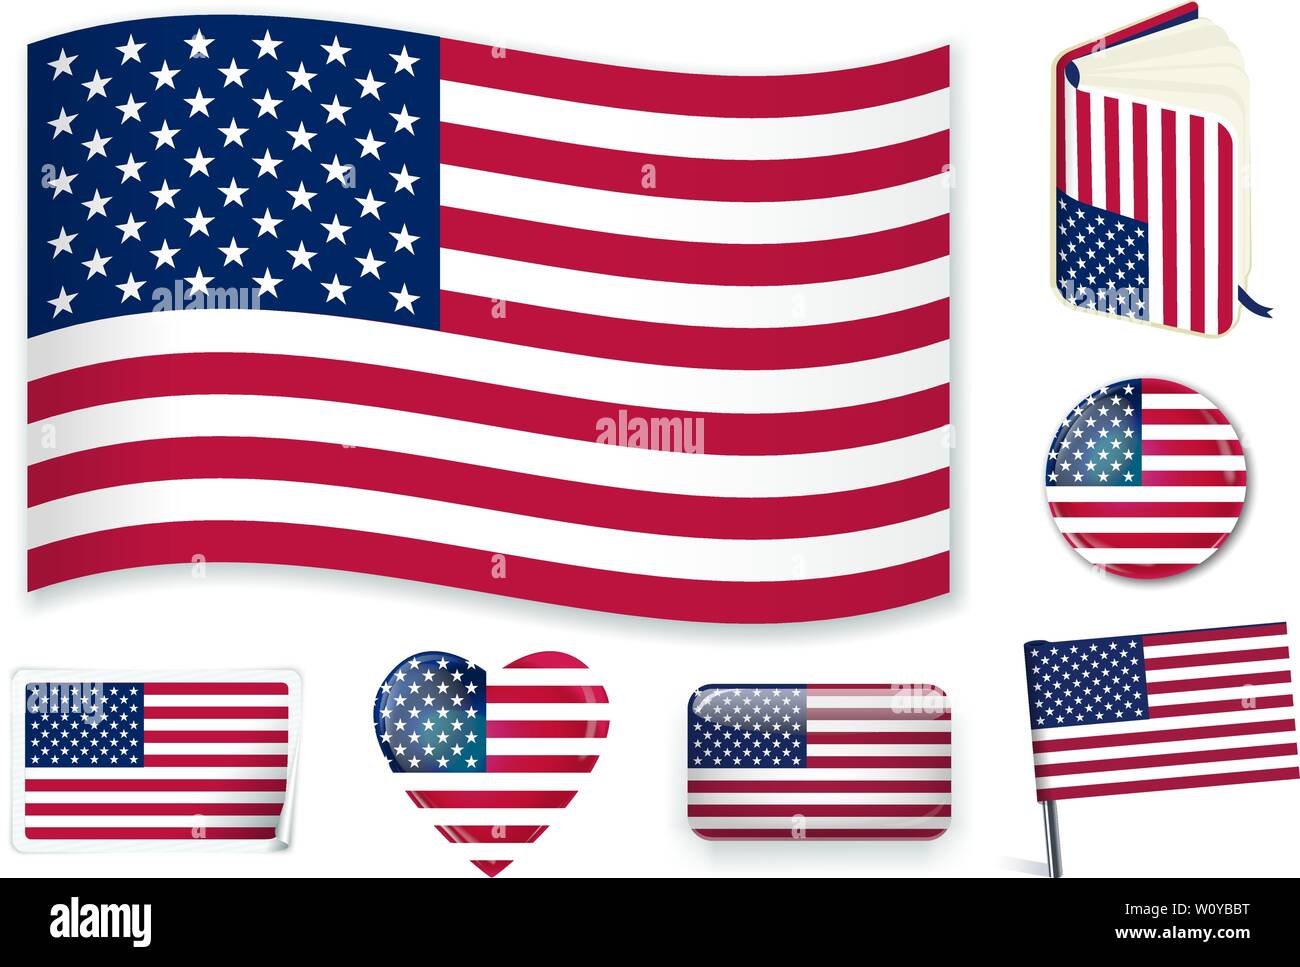 United states flag Stock Vector Images - Alamy